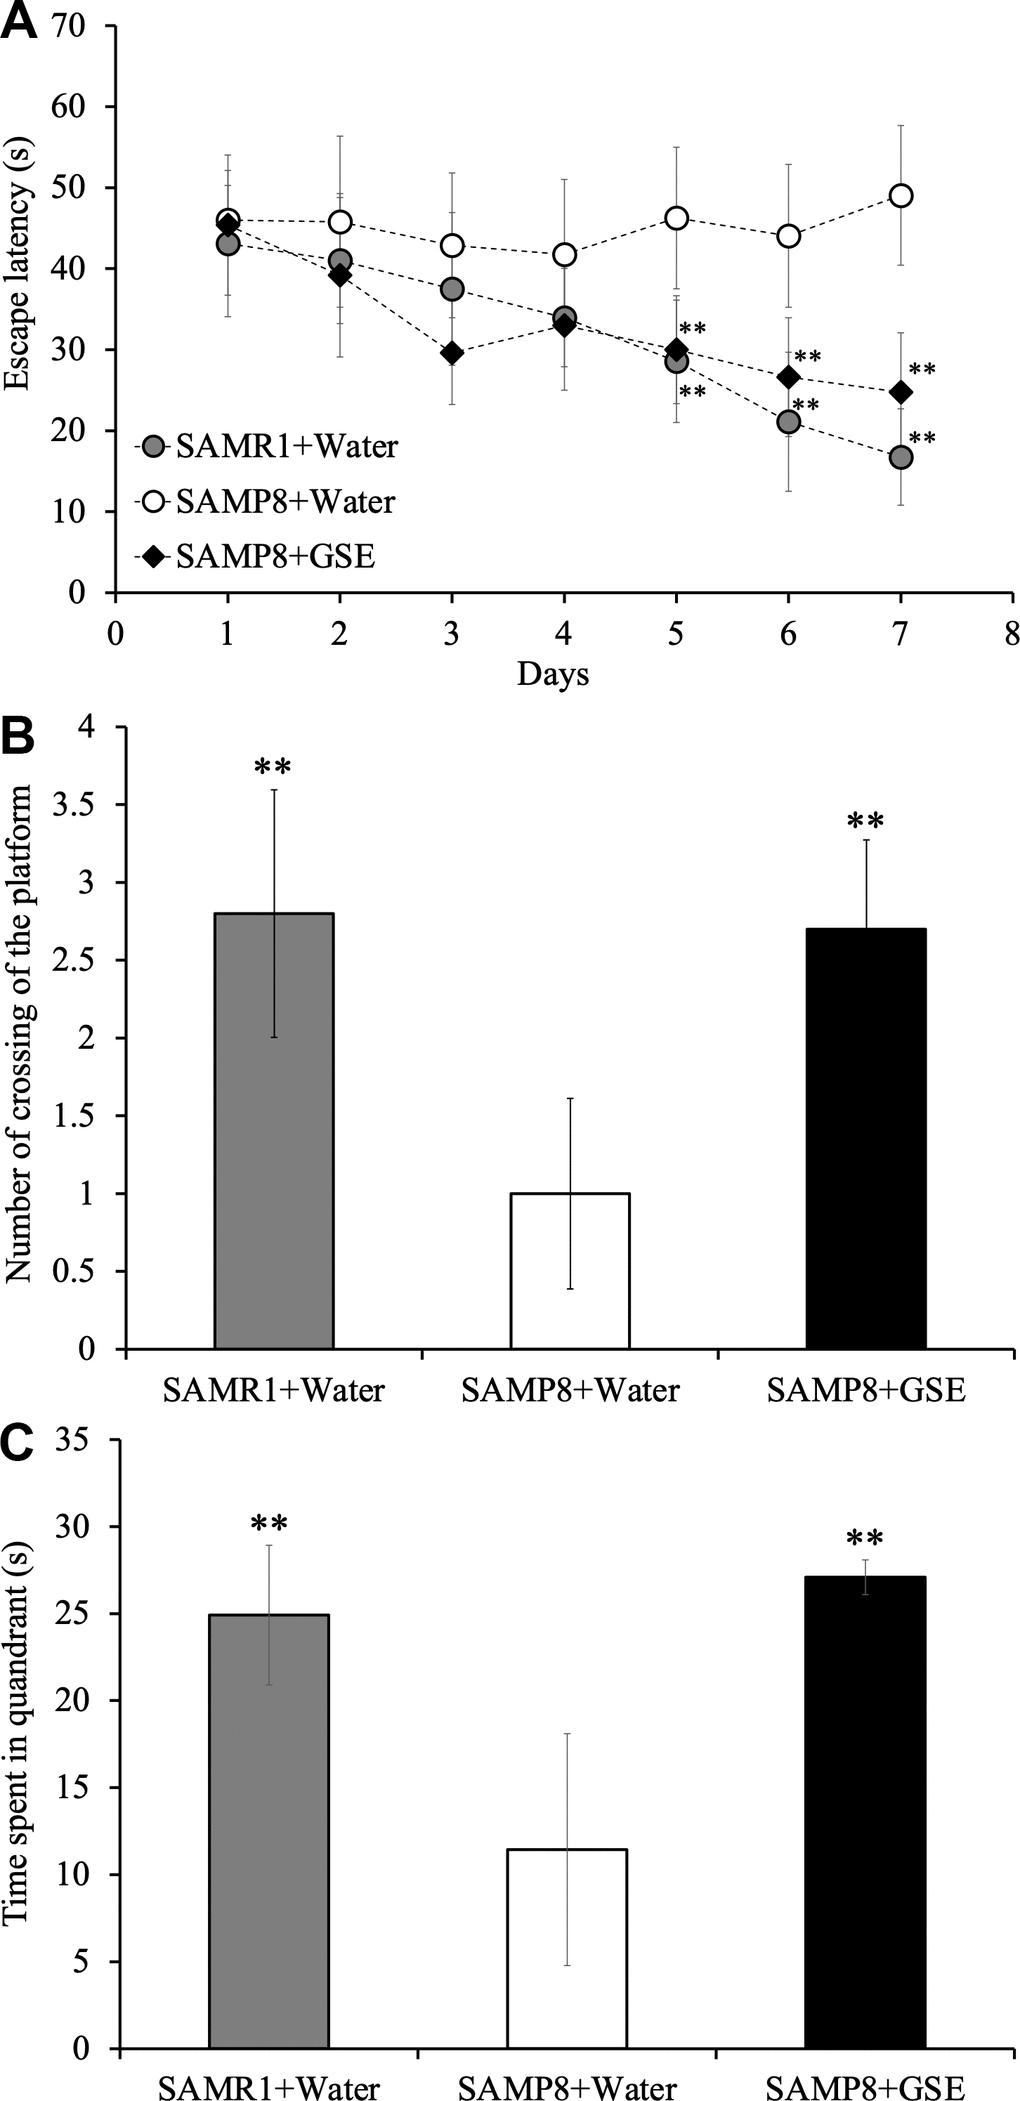 Effect of Grape skin extract (GSE) administration on spatial learning and memory as evaluated by escape latency of senescence-accelerated resistant mouse 1 (SAMR1) mice, senescence-accelerated prone mouse 8 (SAMP8) mice, and SAMP8 50 mg/kg GSE-treated group by Morris water maze test. (A) Effect of GSE on the time spent in the target quadrant. (B) Effect of GSE on numbers of crossings of platform by SAMR1 water-administered and SAMP8 GSE-treated or water-treated mice. (C) * P 